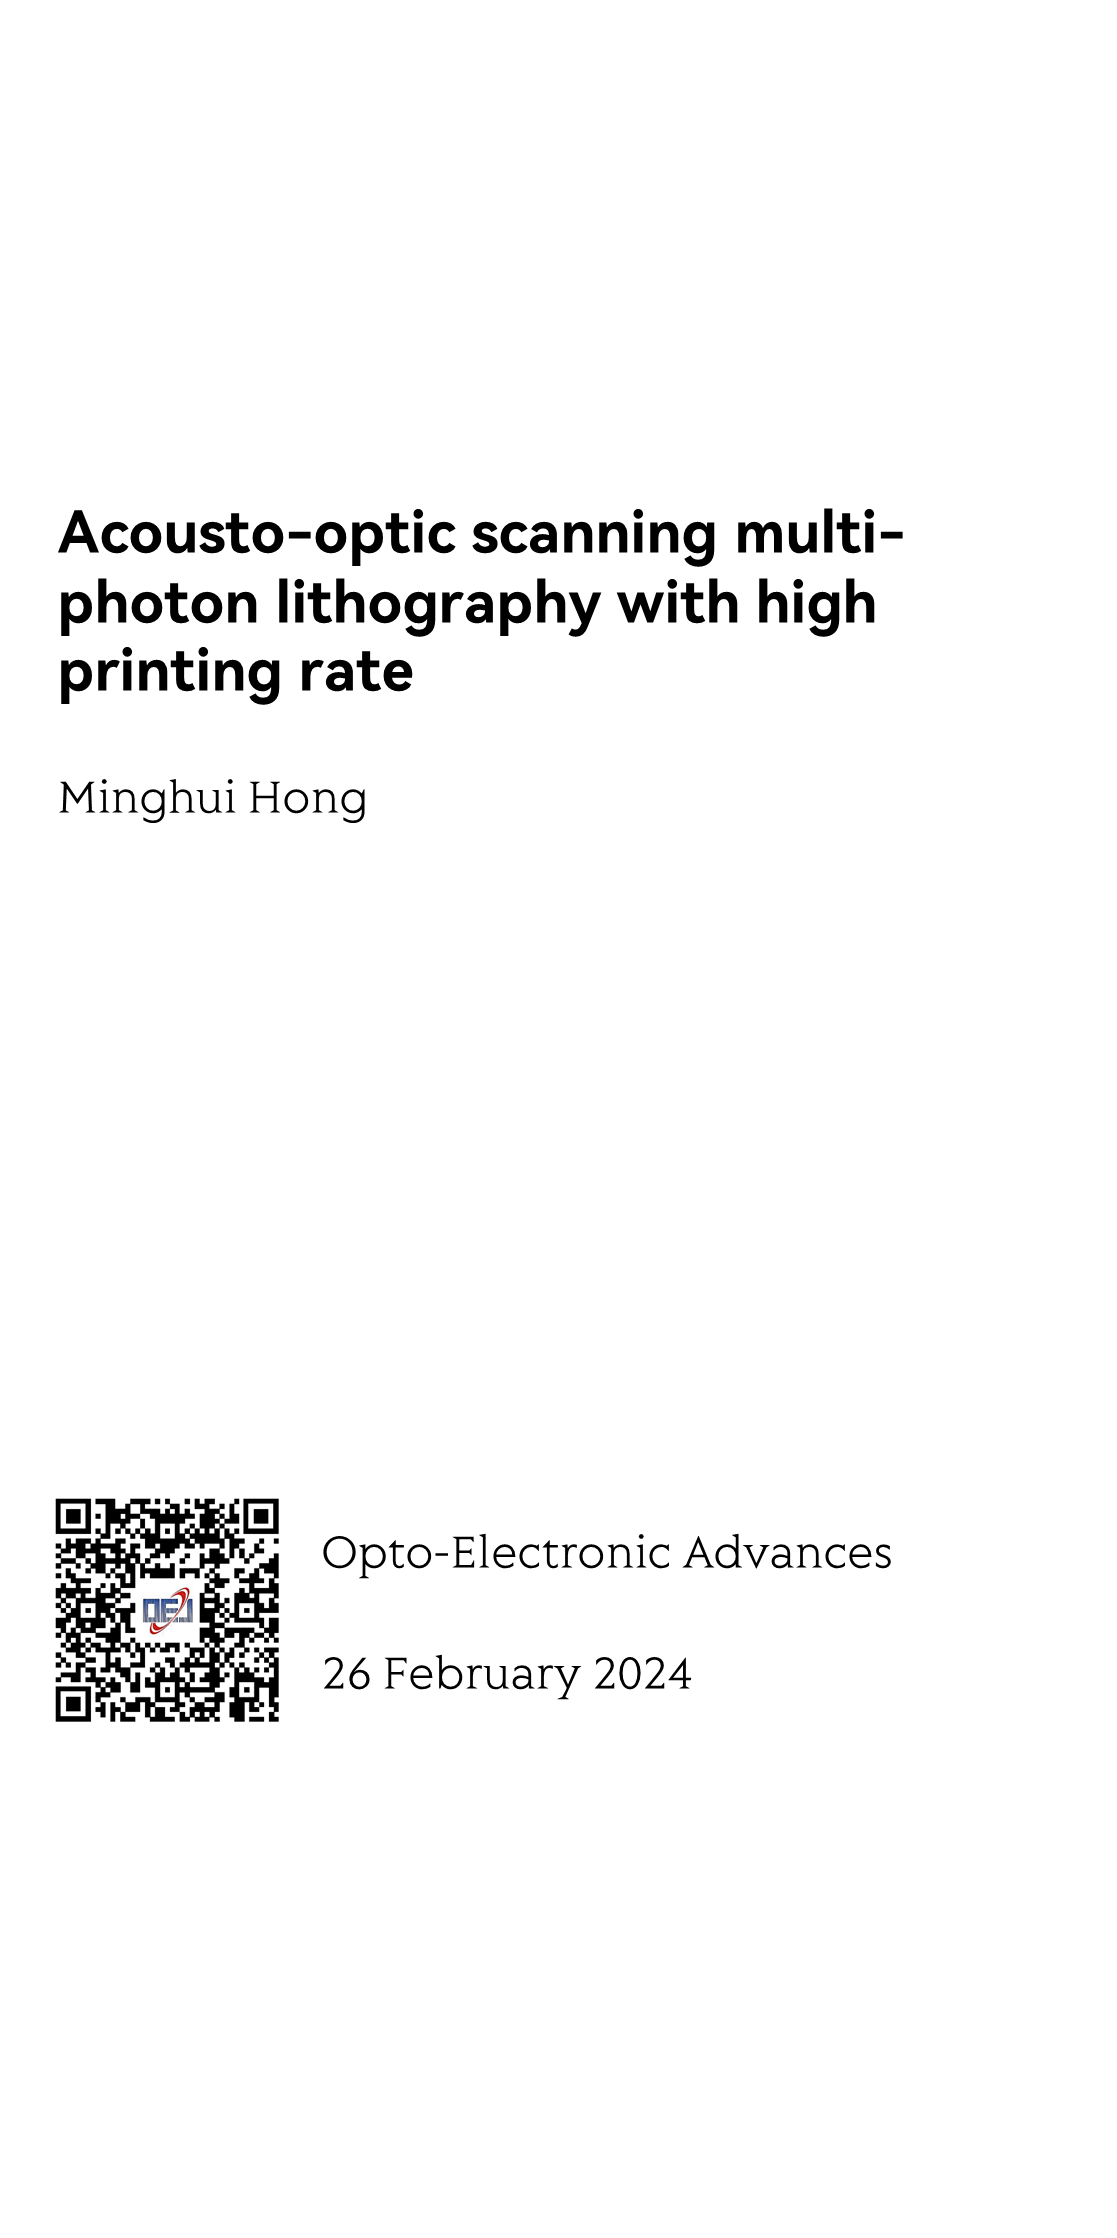 Acousto-optic scanning multi-photon lithography with high printing rate_1